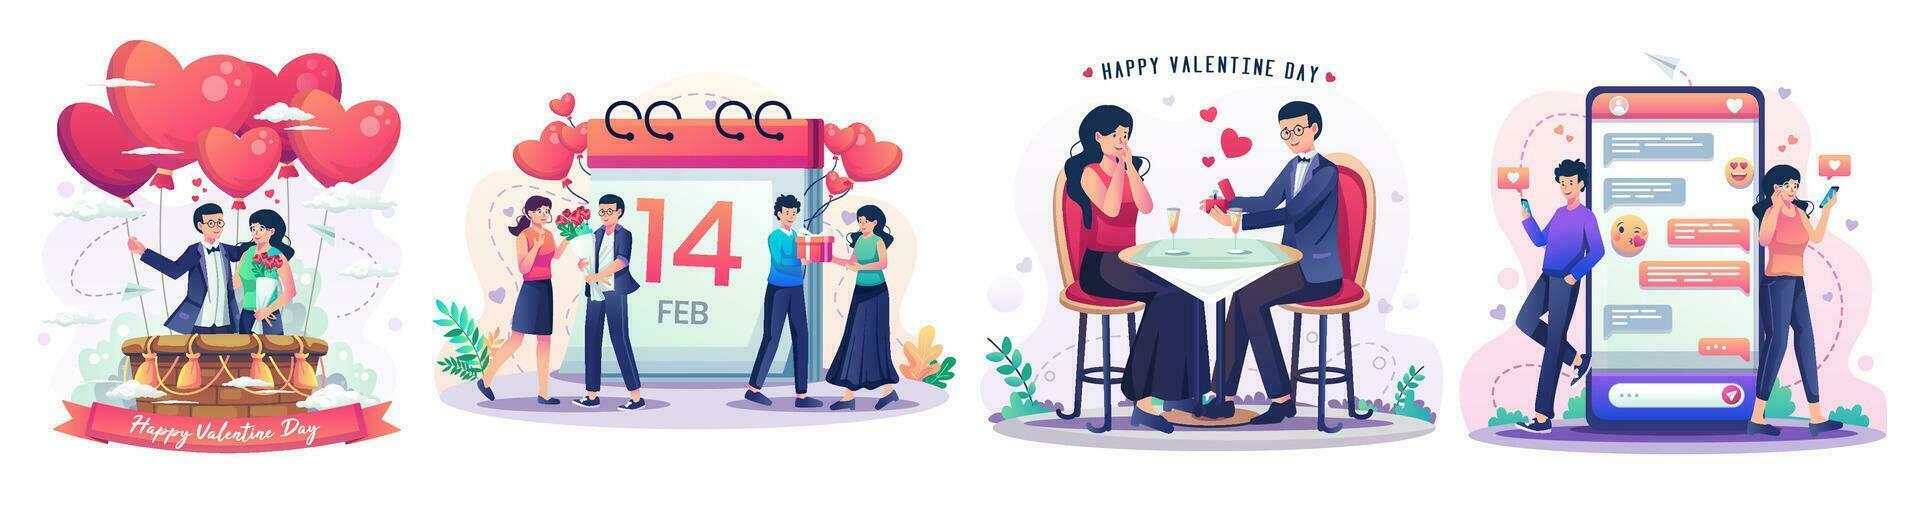 Set of Valentine's Day concept with a romantic couple enjoying valentine's day. a man giving a ring as a proposal at dinner. Online dating and virtual relationships. Flat style vector illustration